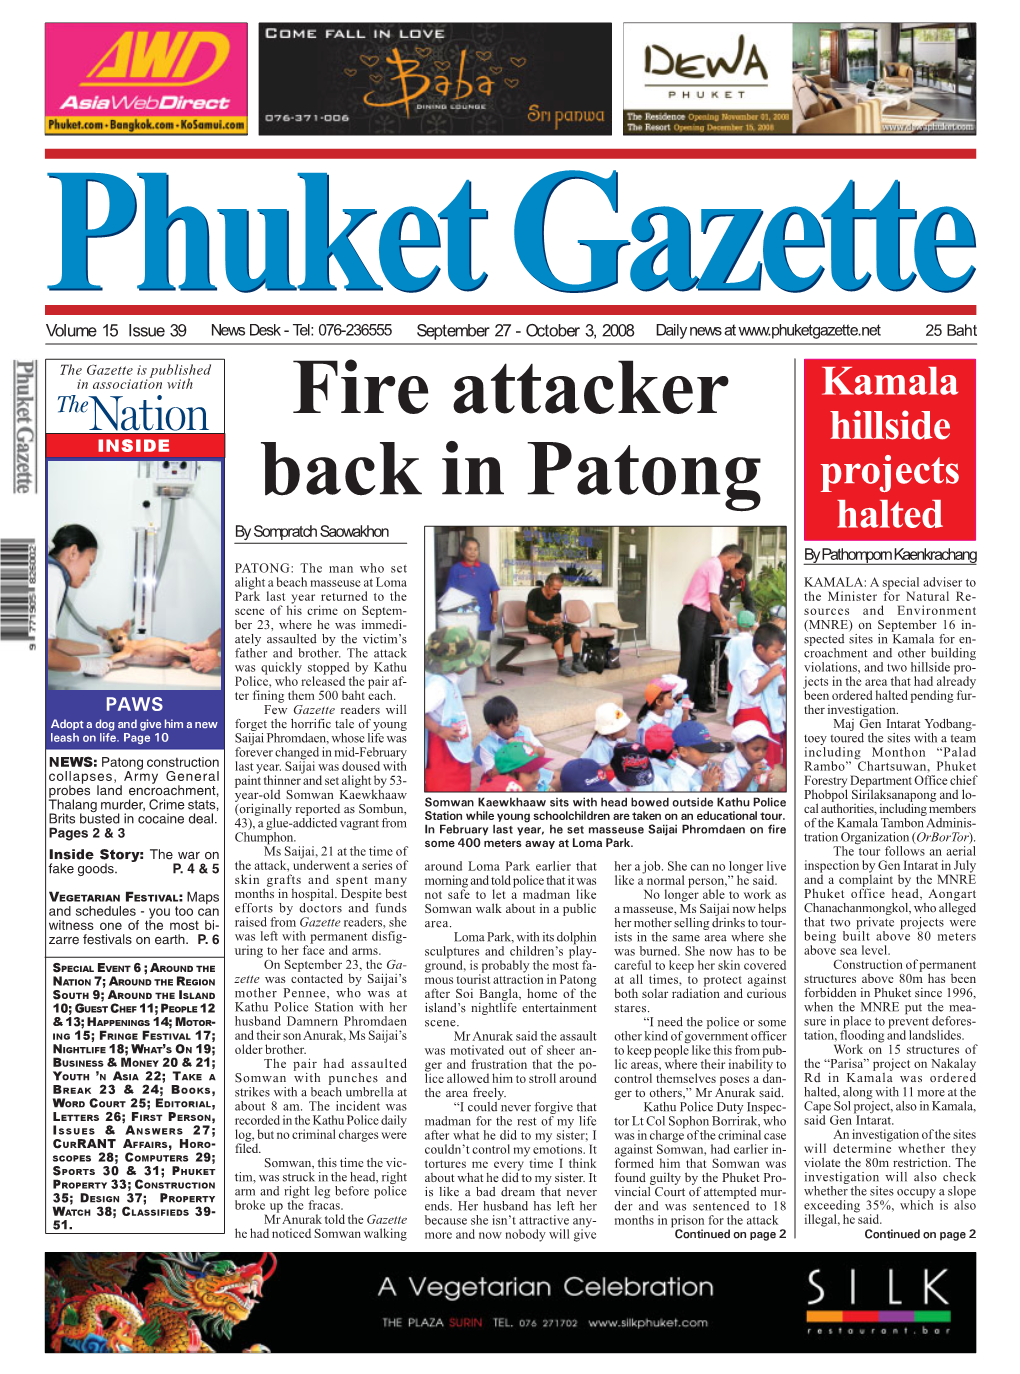 Fire Attacker Back in Patong